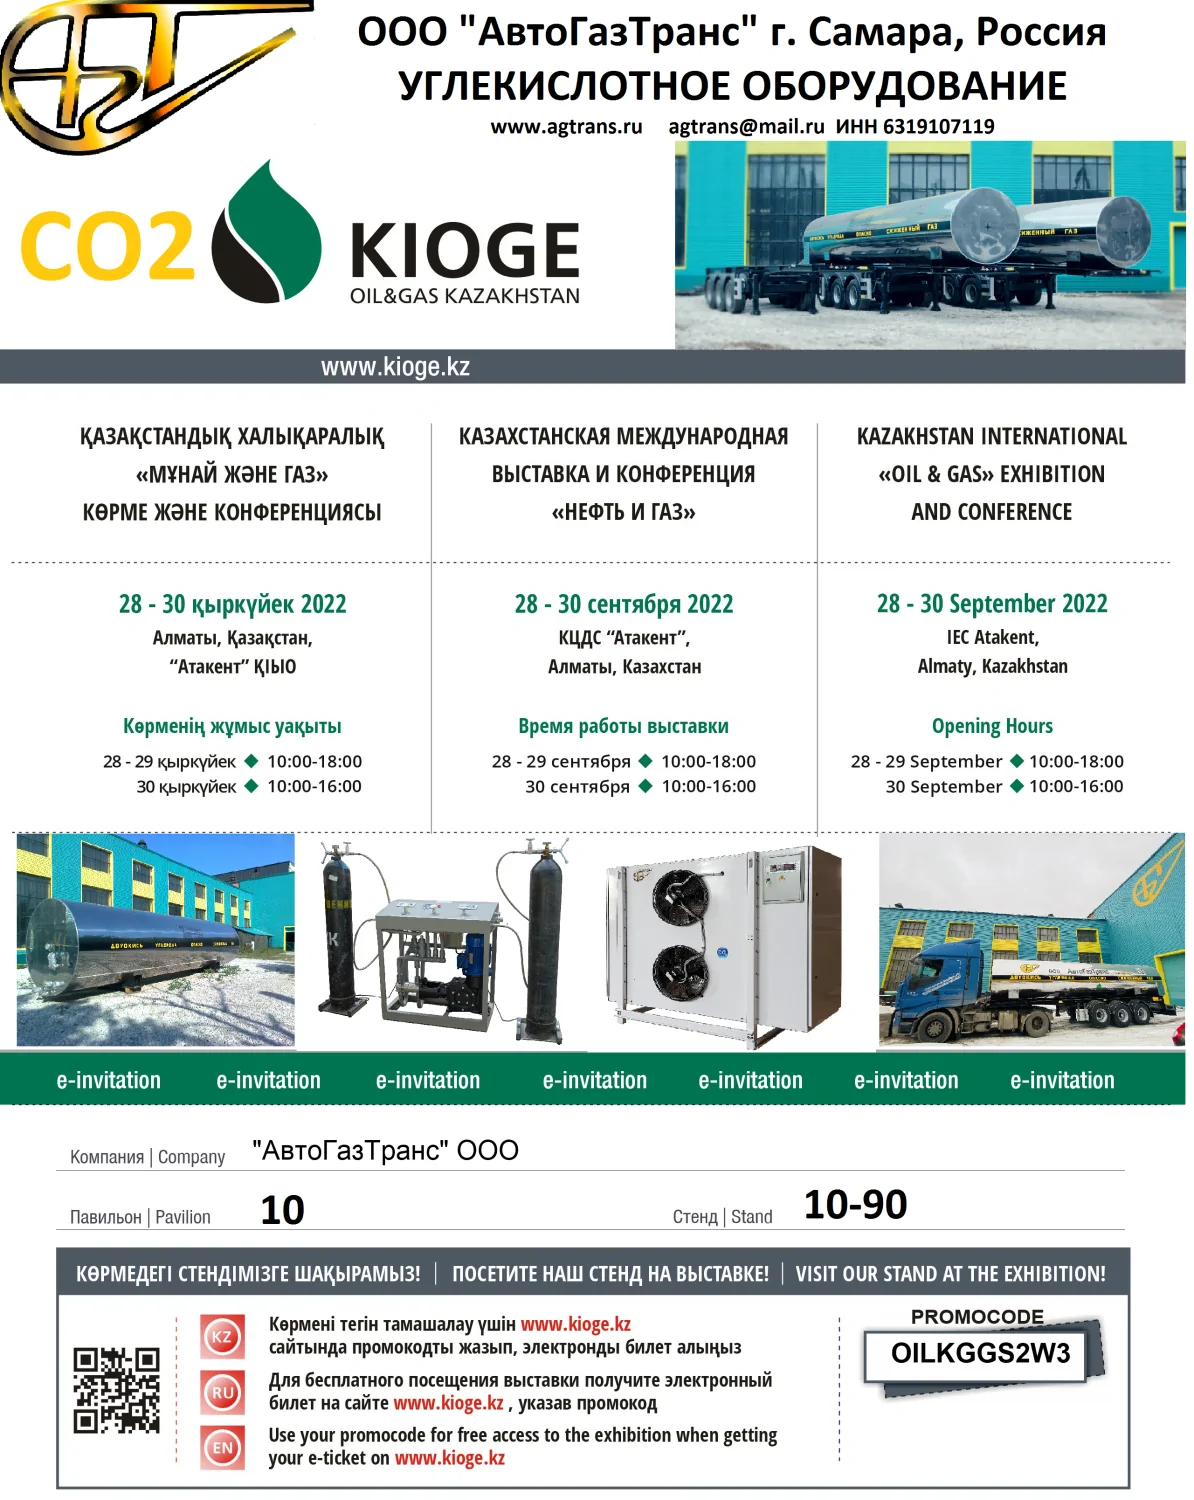 AvtoGazTrans LLC invites you to visit our stand No. 10-90 at the Kazakhstan International Oil and Gas Exhibition KIOGE-2022